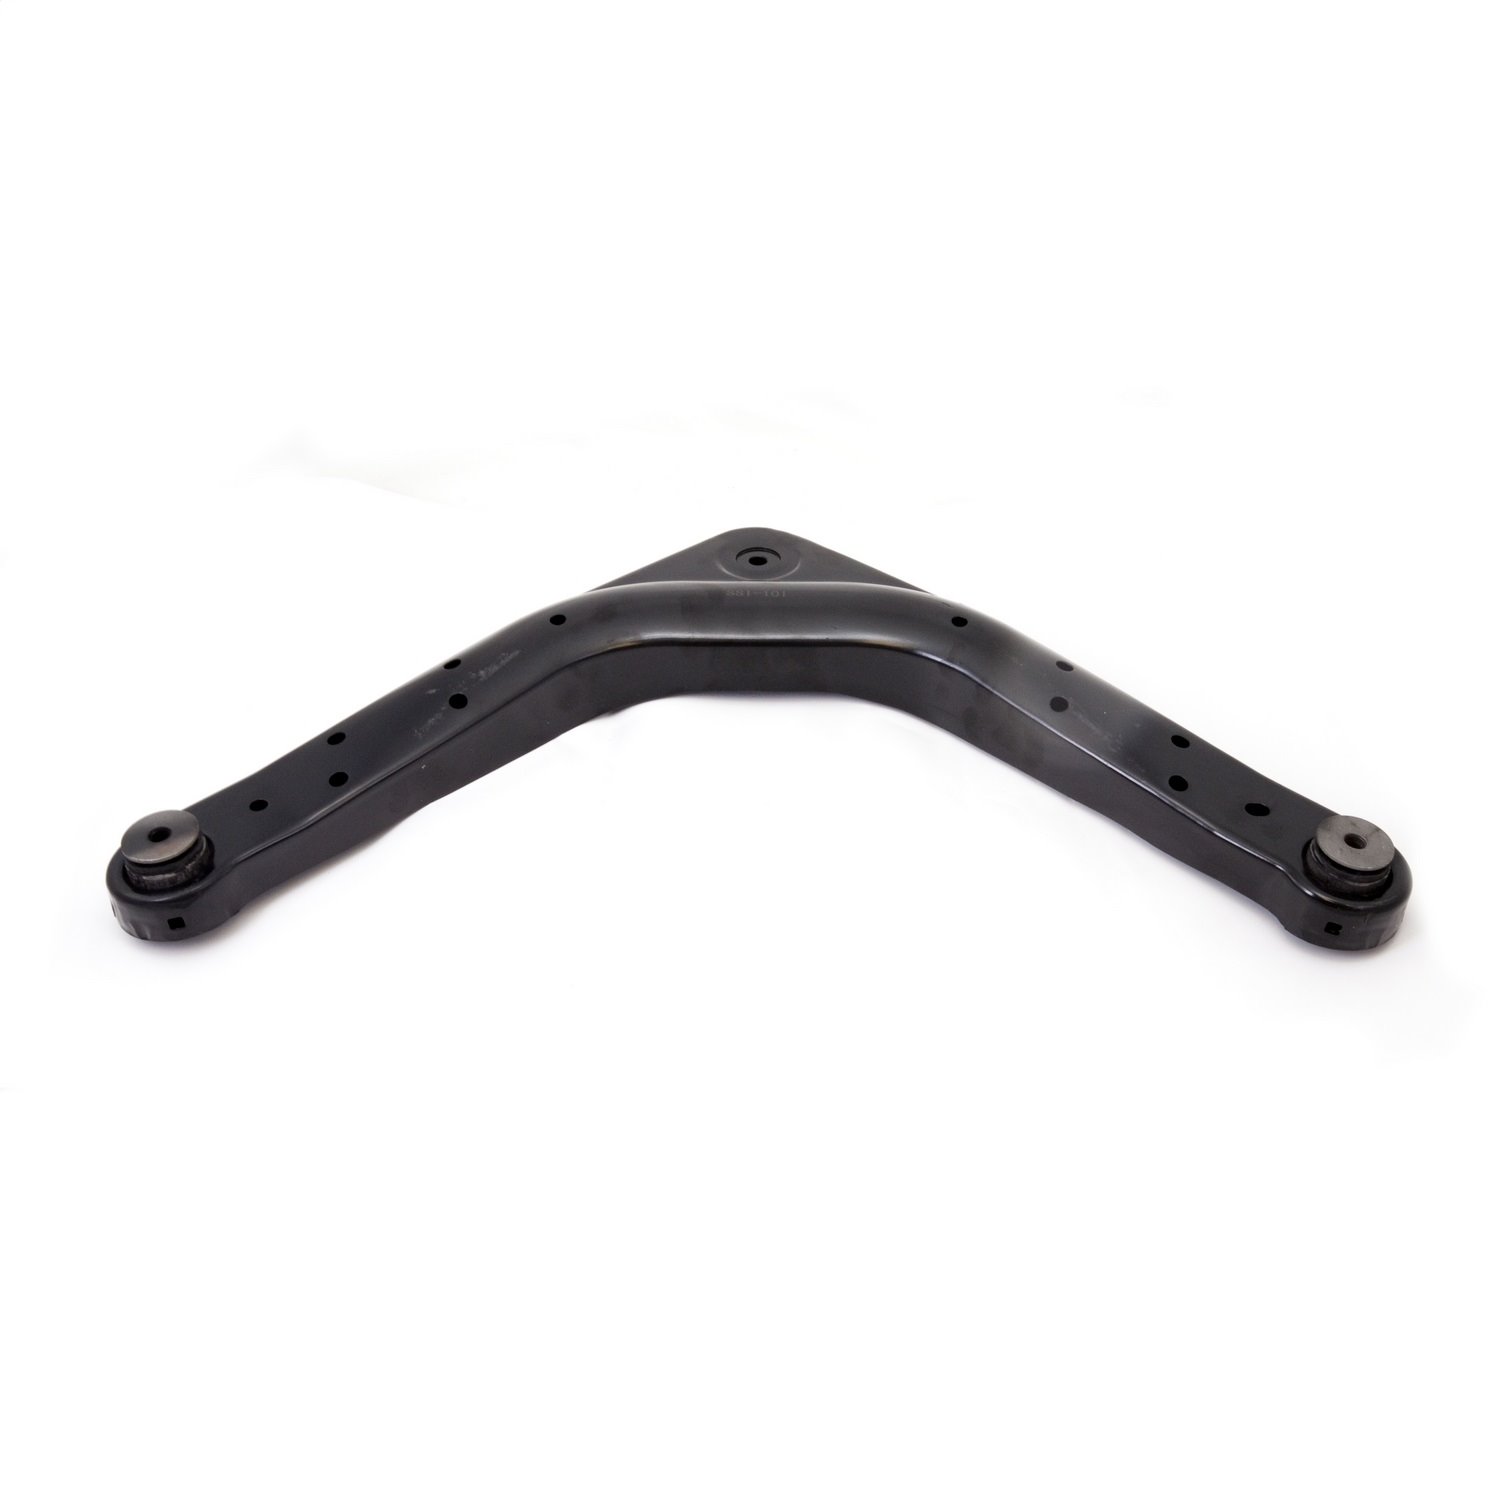 Stock replacement rear upper control arm from Omix-ADA, Fits 99-04 Jeep Grand Cherokee WJ